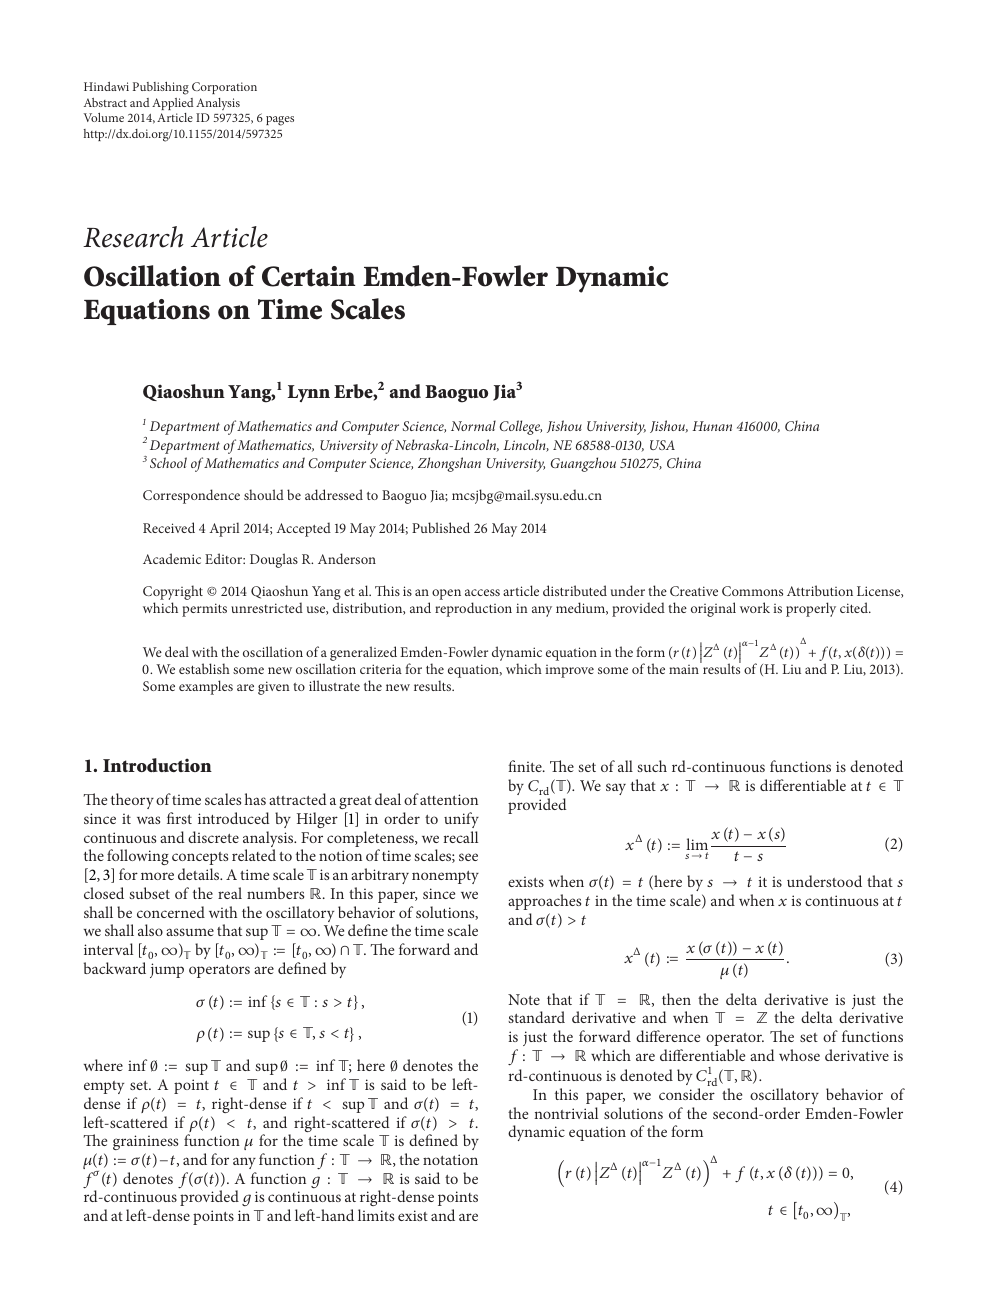 Oscillation Of Certain Emden Fowler Dynamic Equations On Time Scales Topic Of Research Paper In Mathematics Download Scholarly Article Pdf And Read For Free On Cyberleninka Open Science Hub